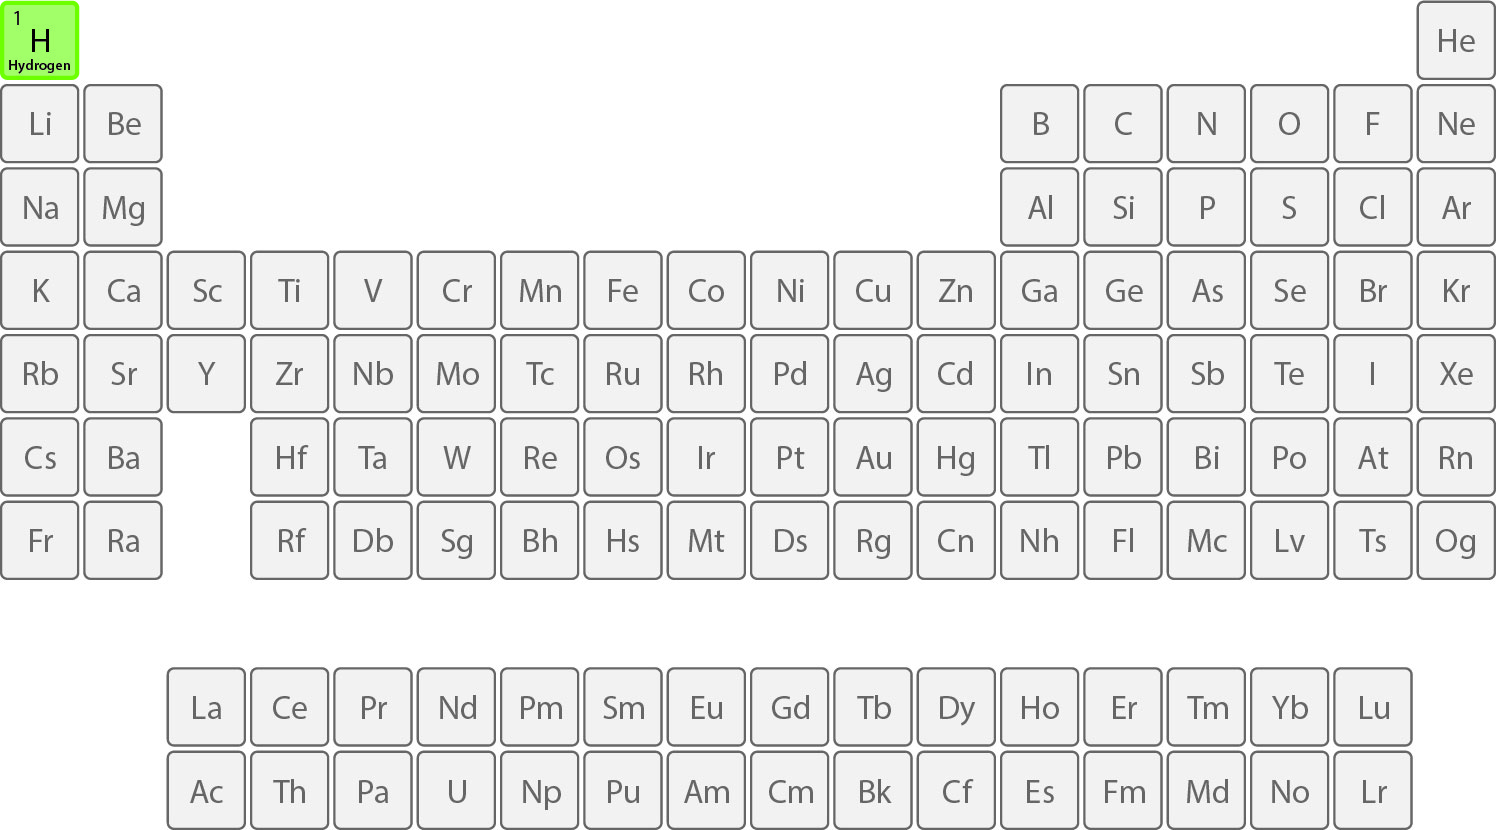 Hydrogen on the periodic table